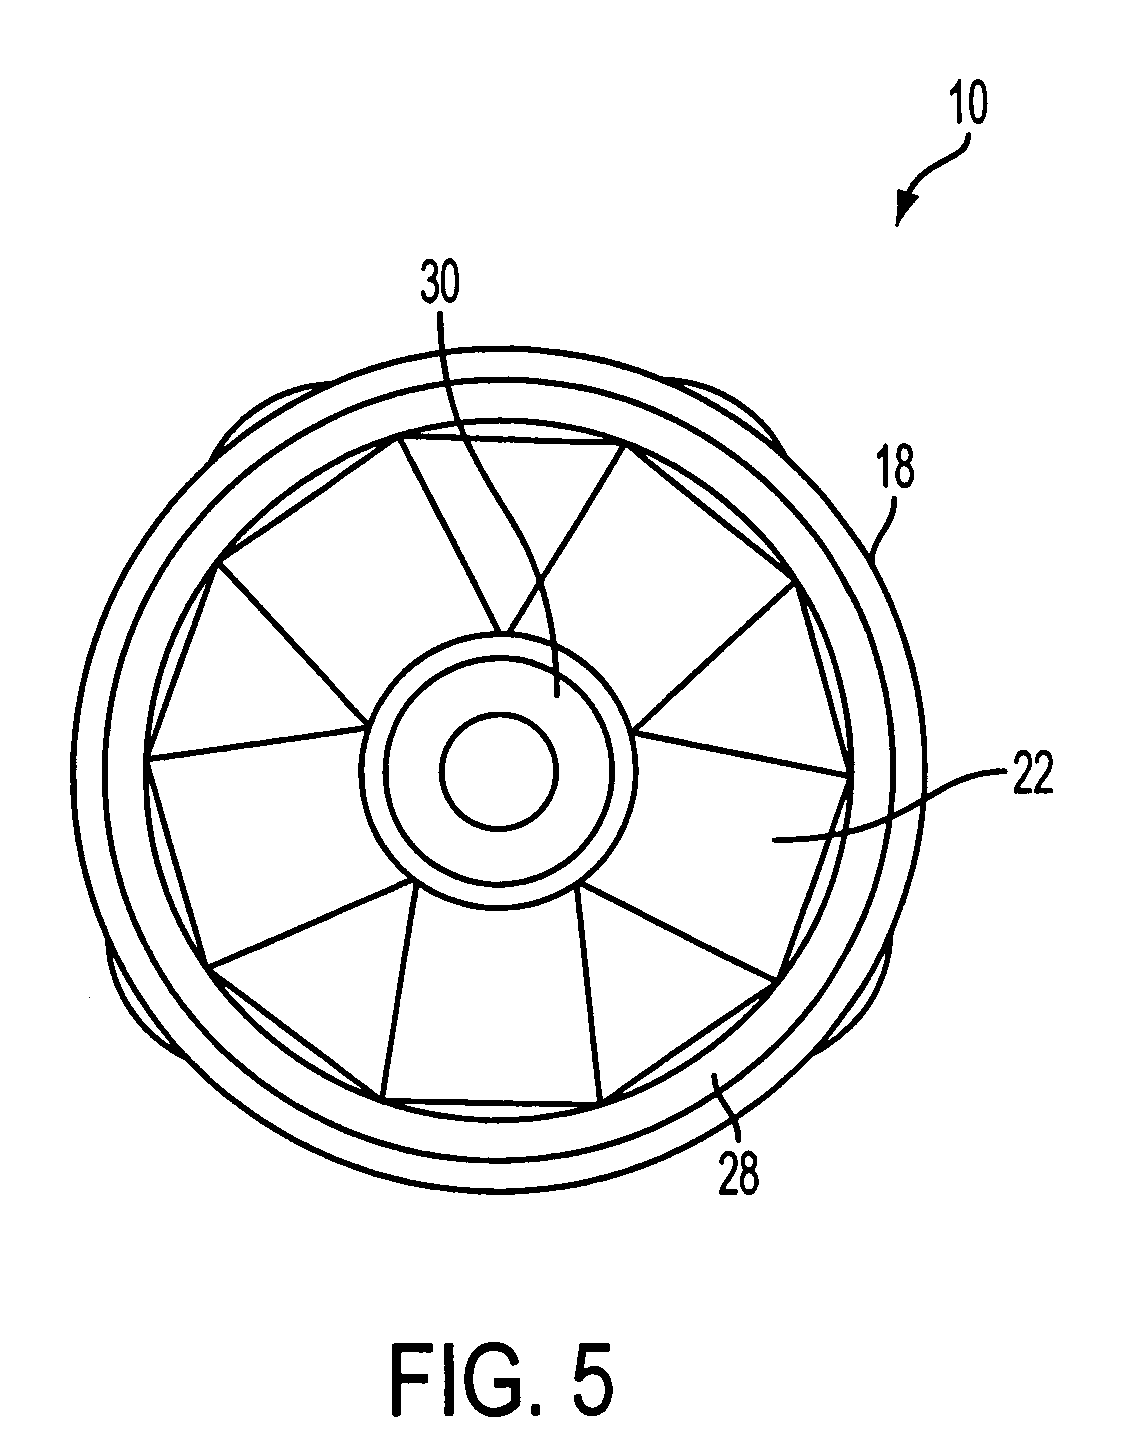 Pressure reinforced plastic container having a moveable pressure panel and related method of processing a plastic container